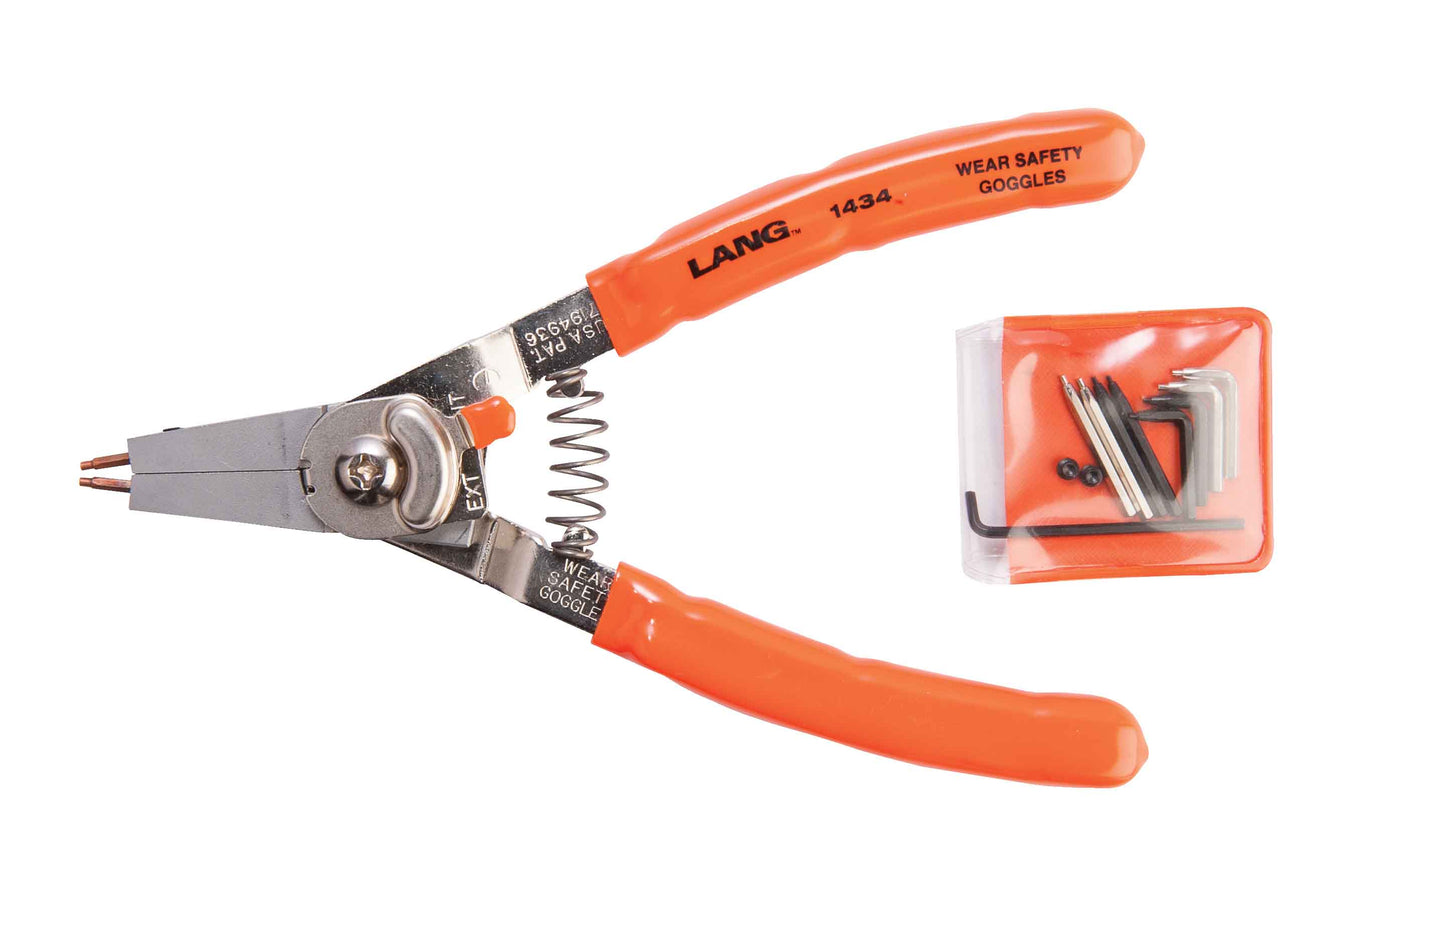 LANG 1434 Quick Switch Pliers with Tip Kit